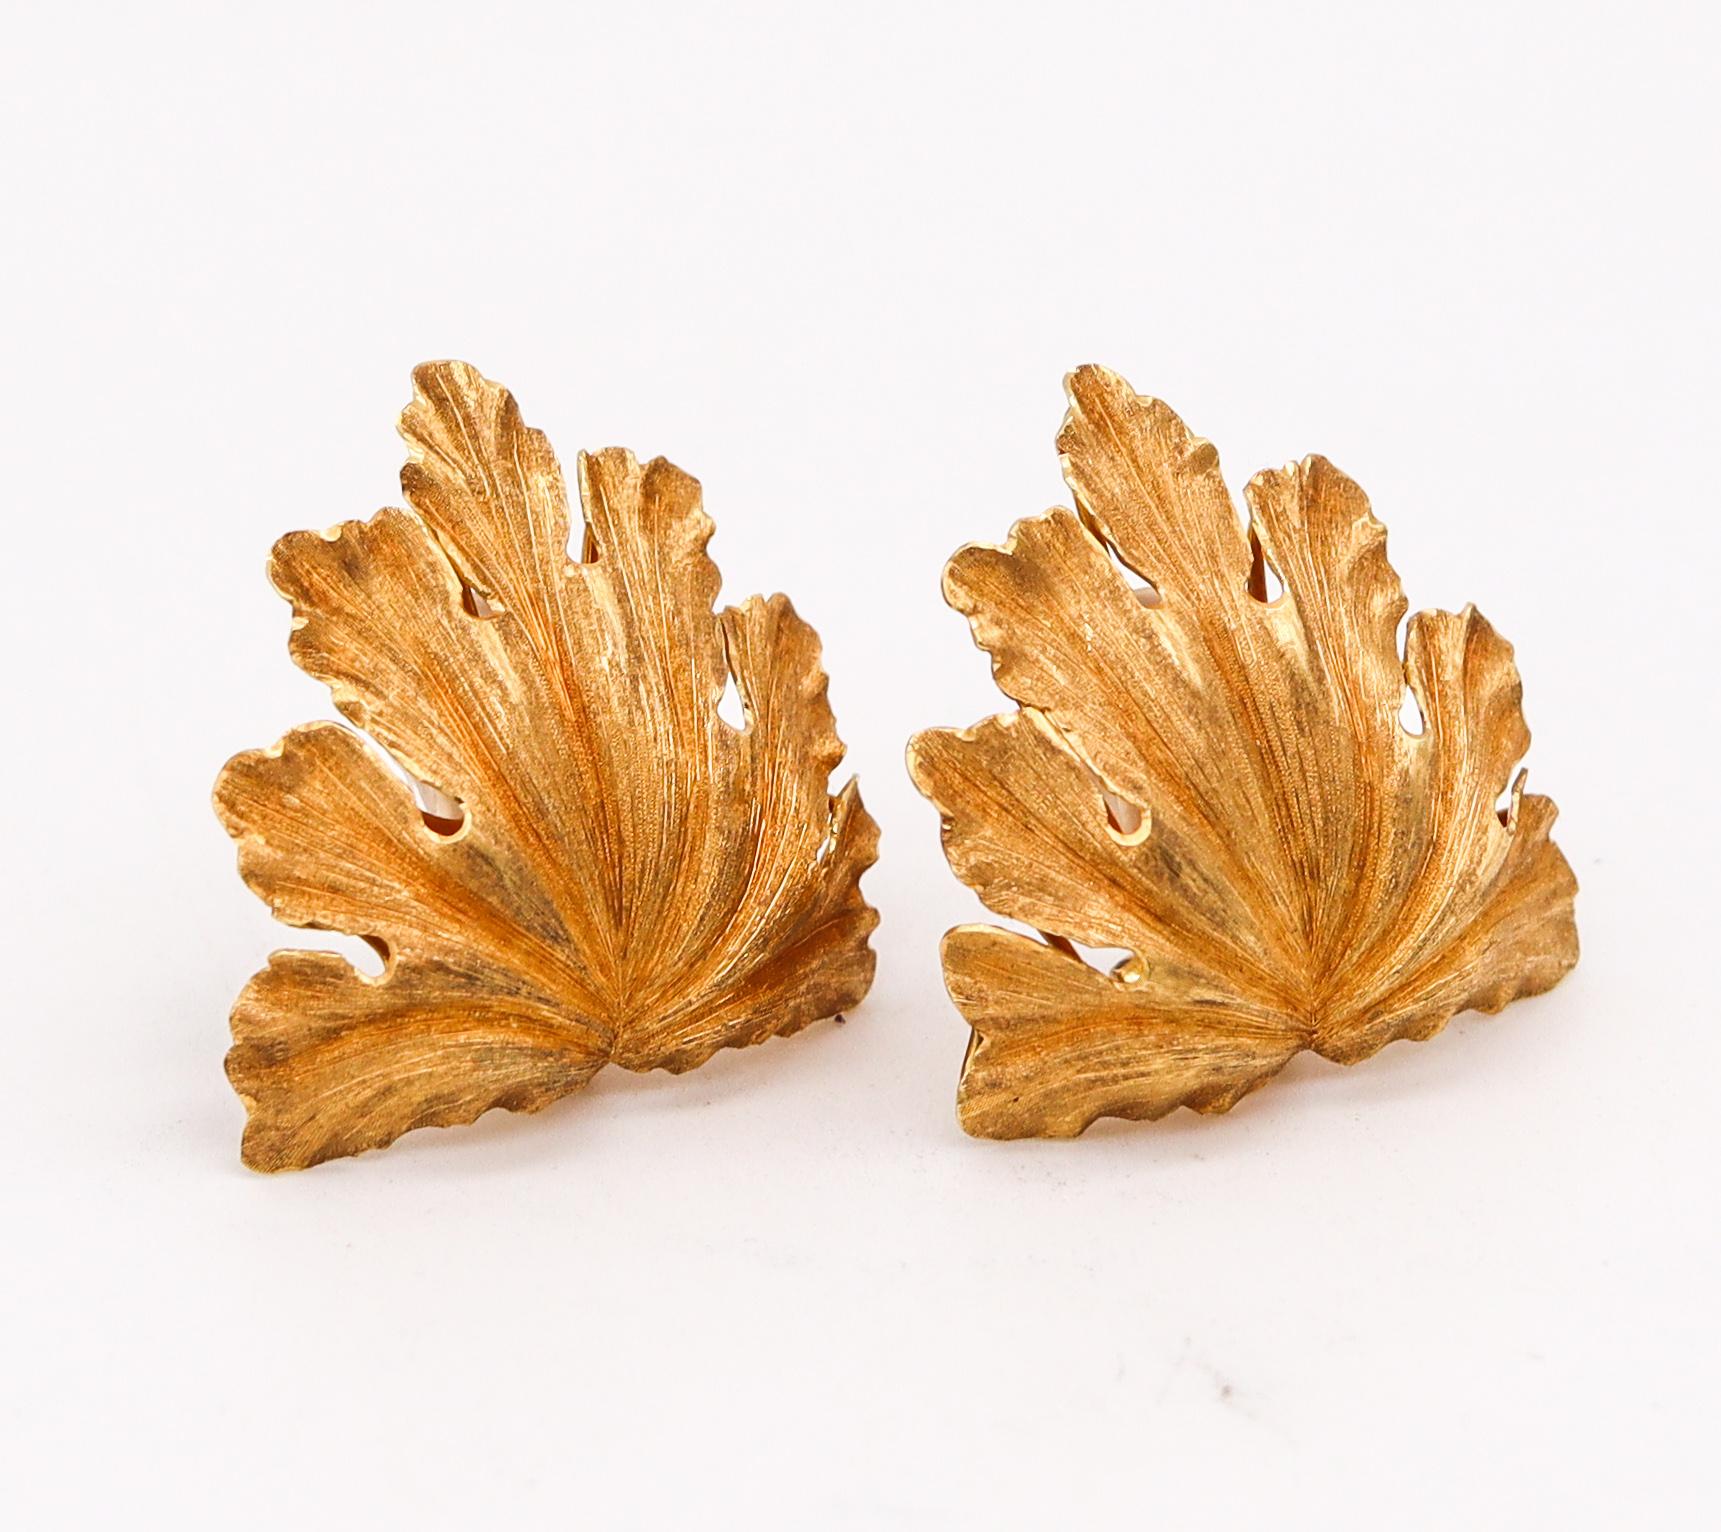 Leafs earrings designed by Buccellati.

Beautiful oversized clips-on earrings, made in Milan Italy by the famous jewelry house of Buccellati, back in the late 1970's. These rare pieces were designed with a baroque revival style in the shape of an